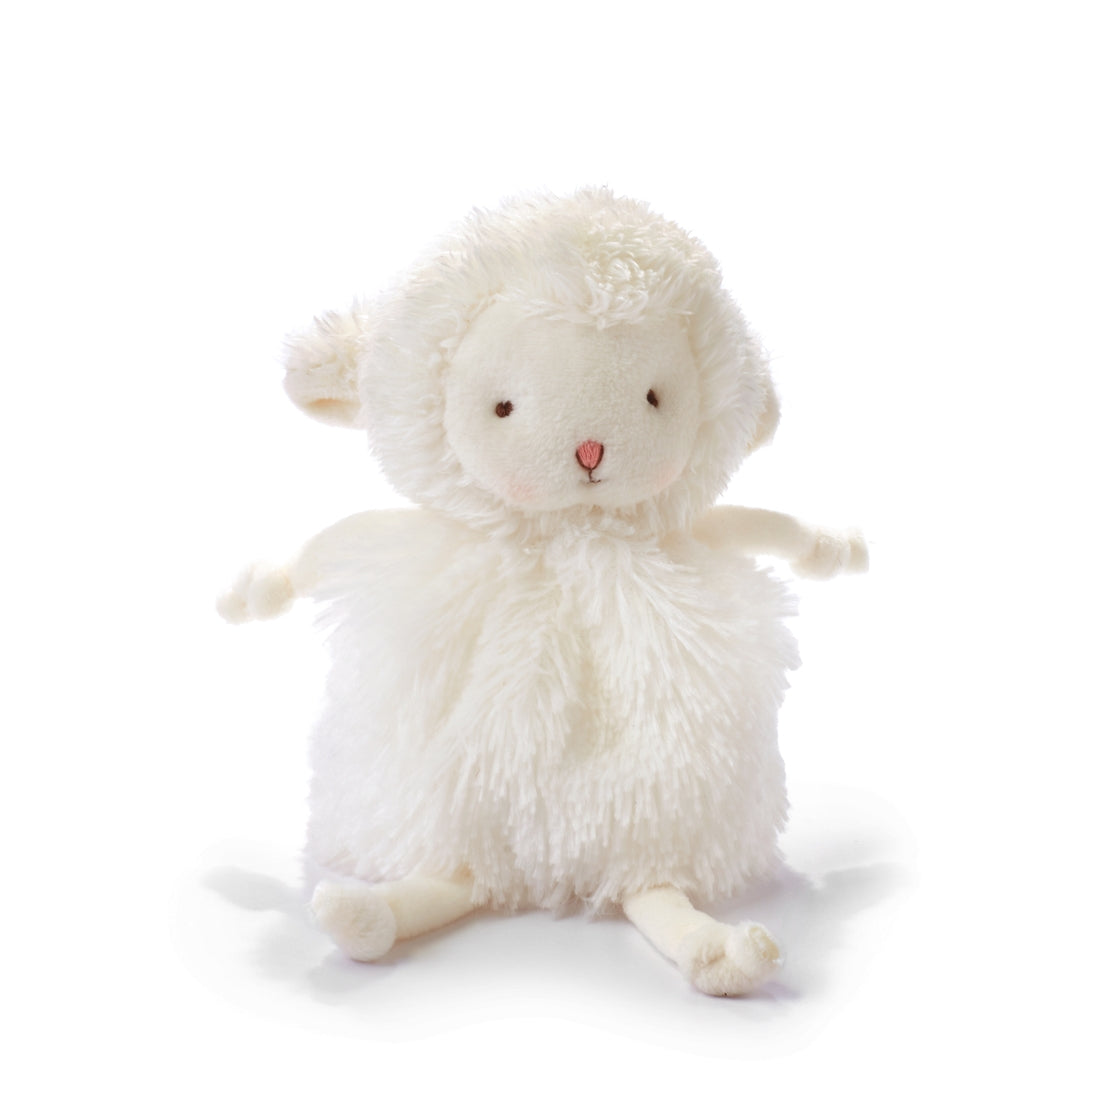 Best Easter gifts for kids. Small (5 inches) fluffy lamb toy.